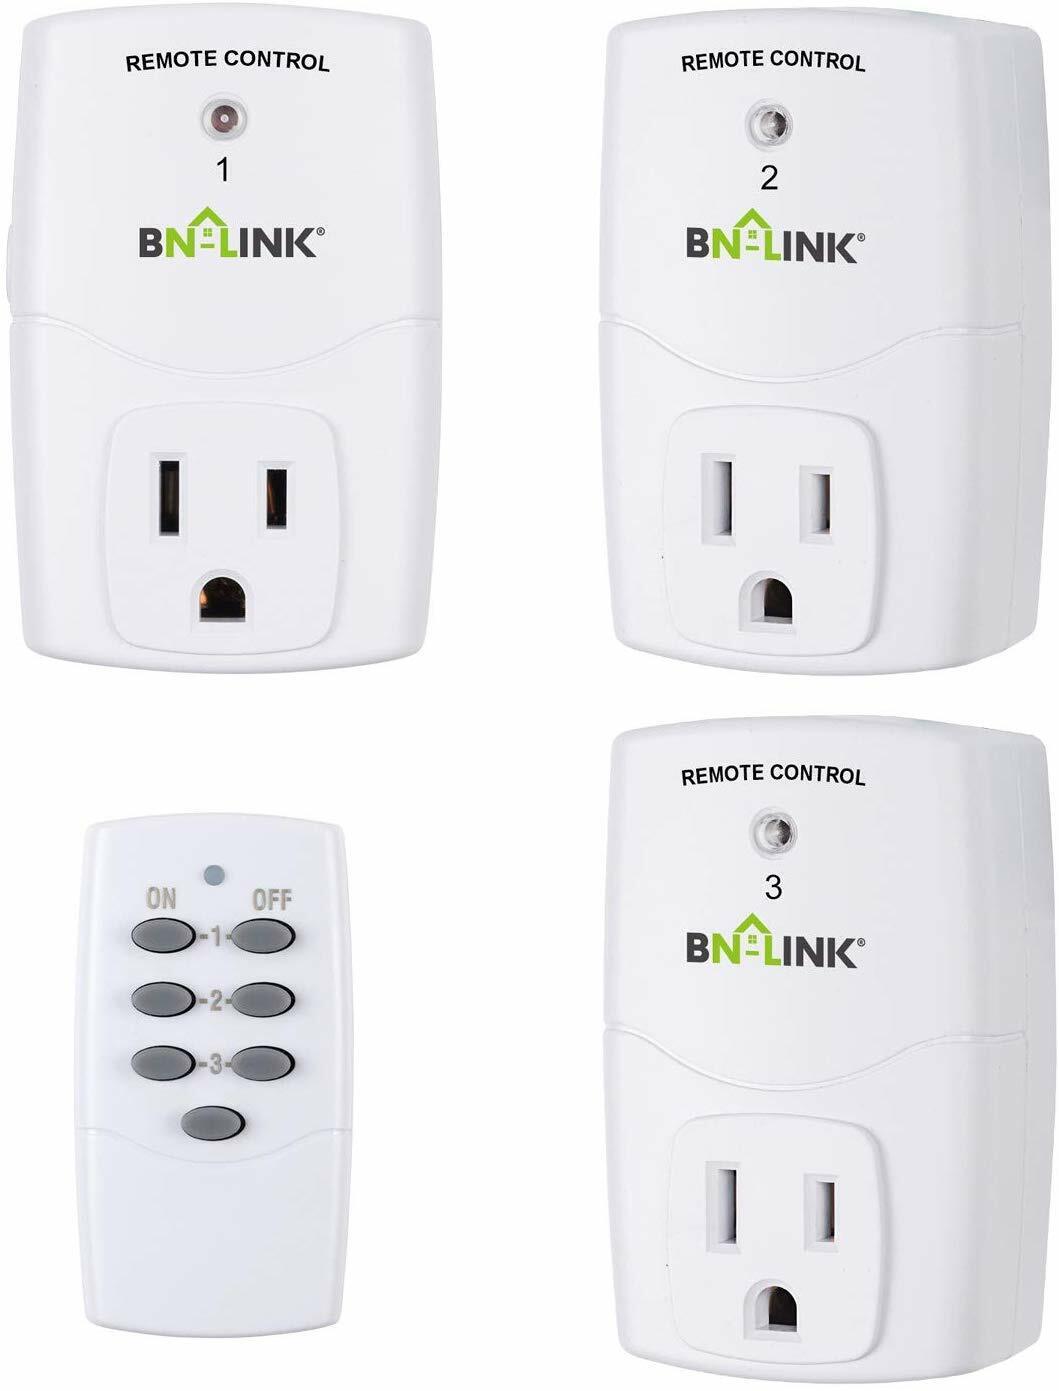 BN-LINK Wireless Remote Control Outlet Switch Power Plug In For House Appliances